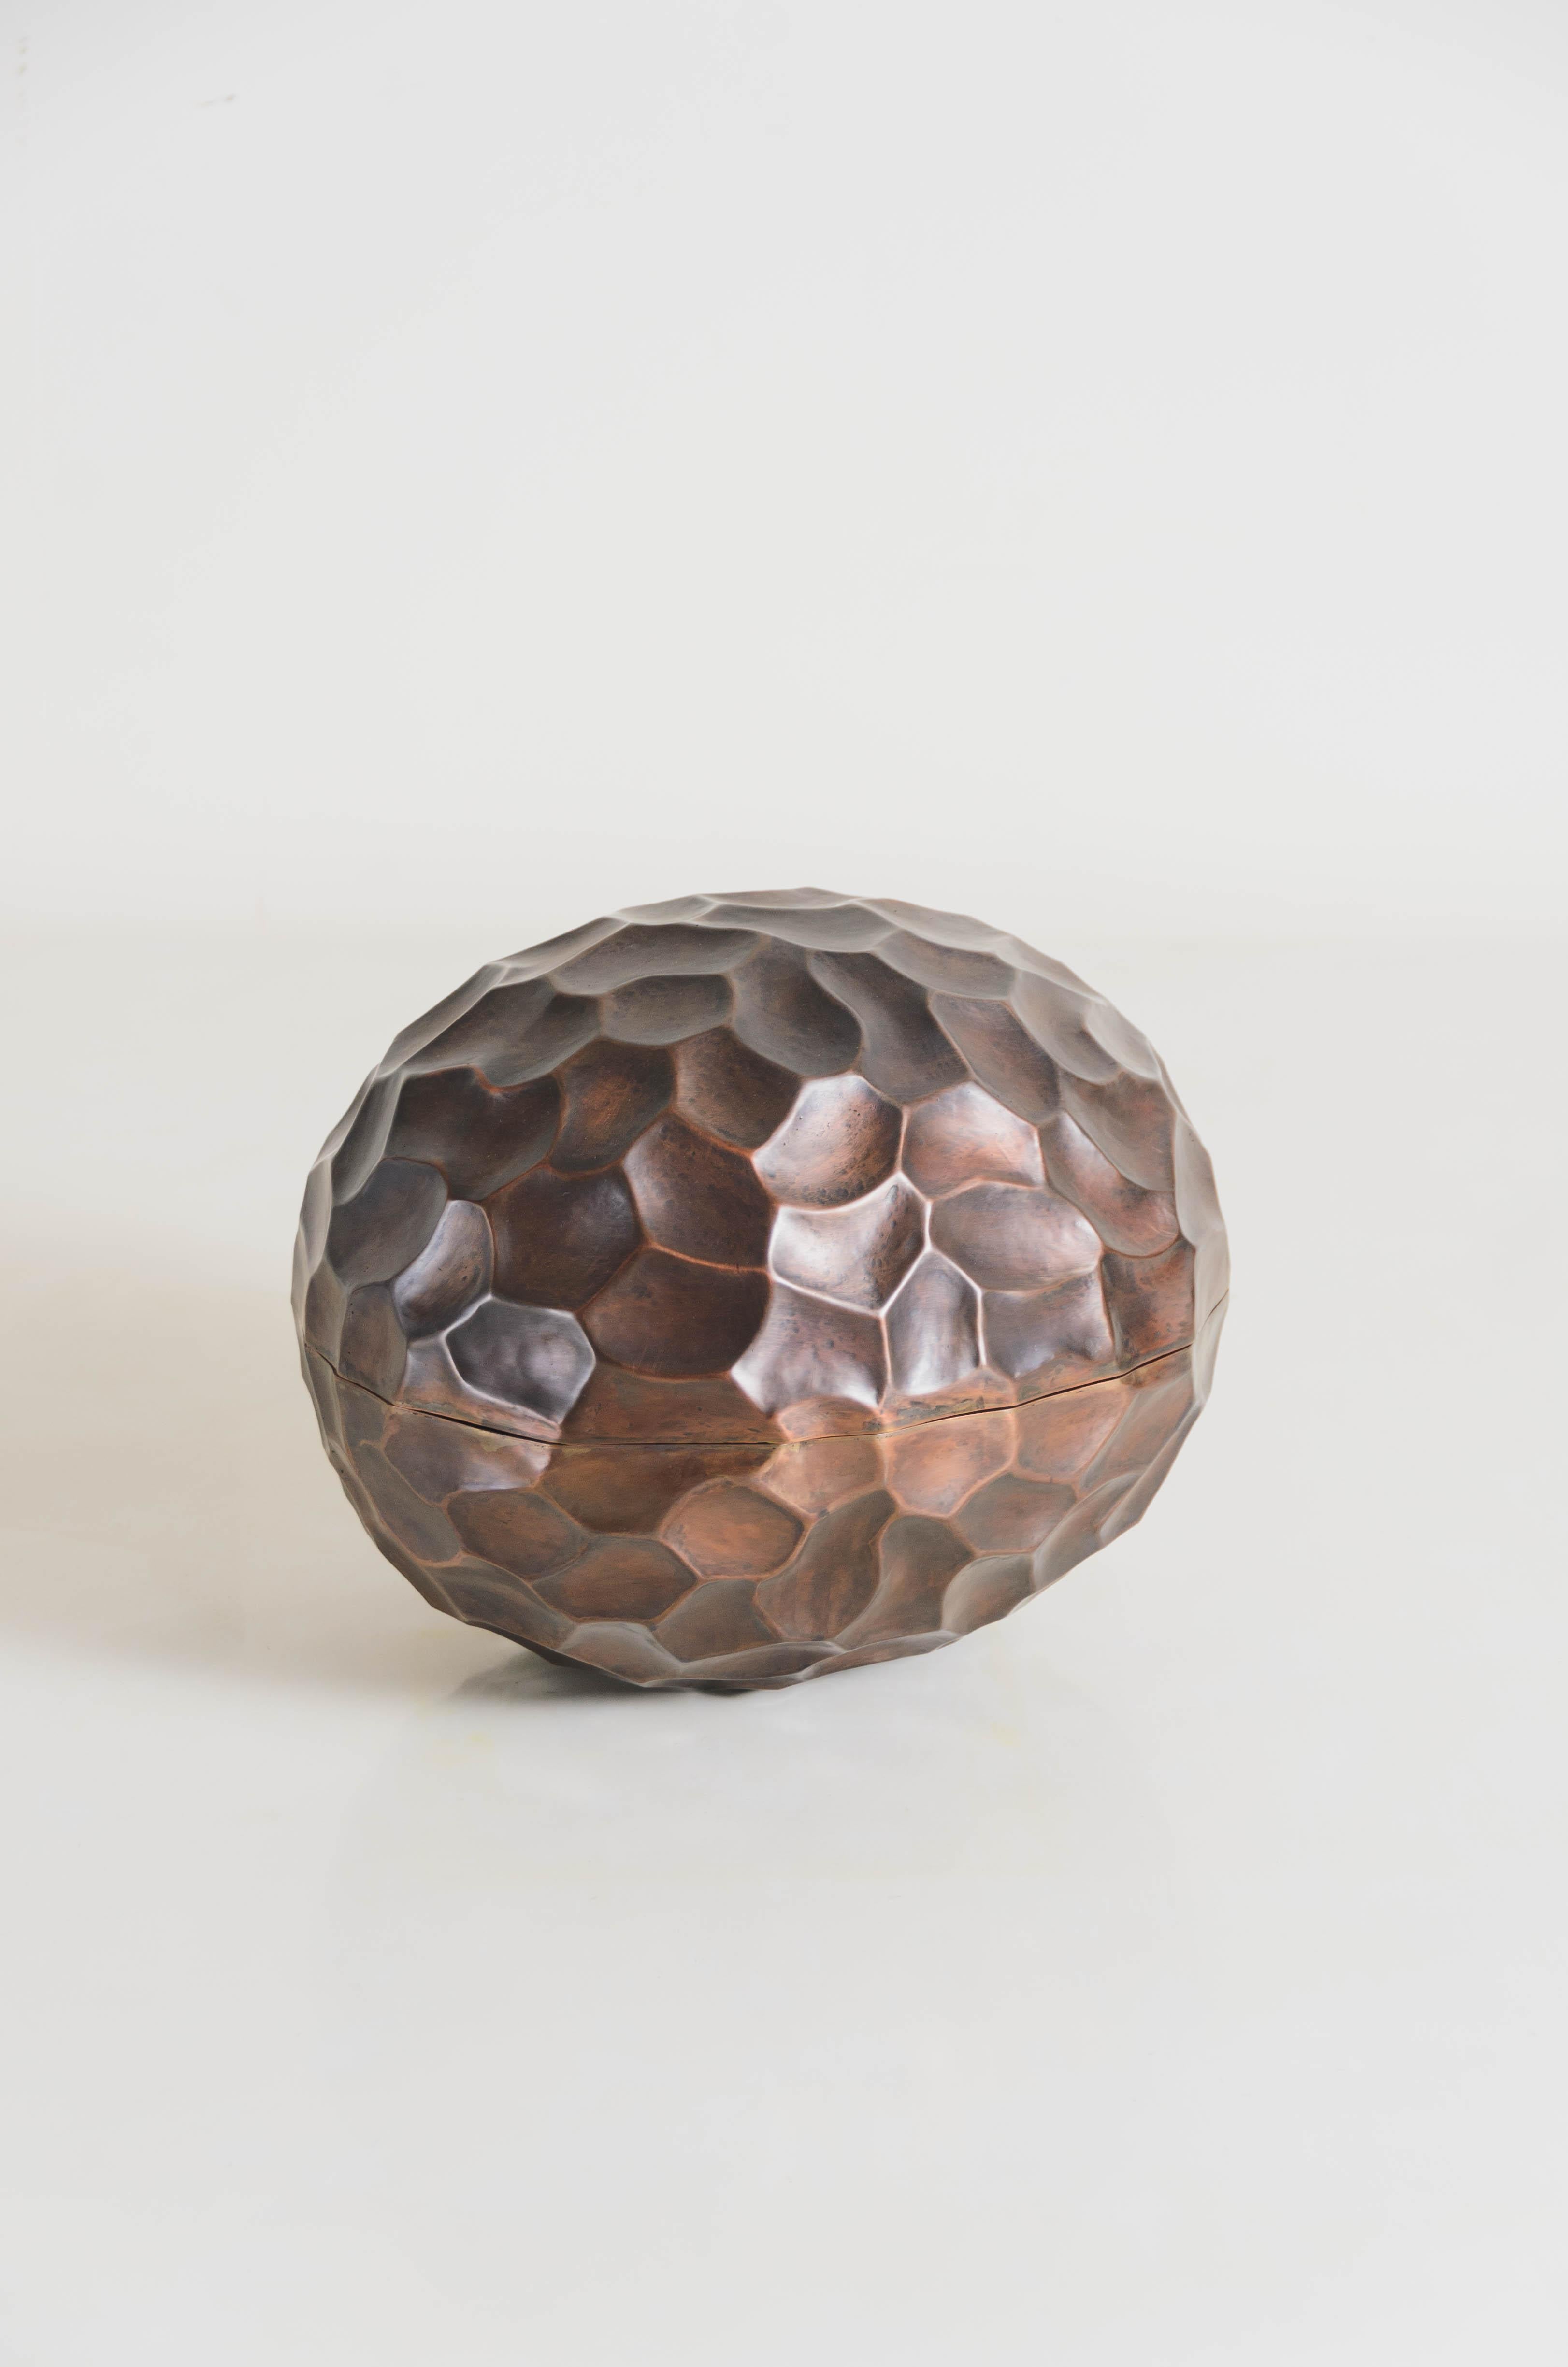 Repoussé Contemporary Rocco Egg Box in Antique Copper by Robert Kuo, Limited Edition For Sale